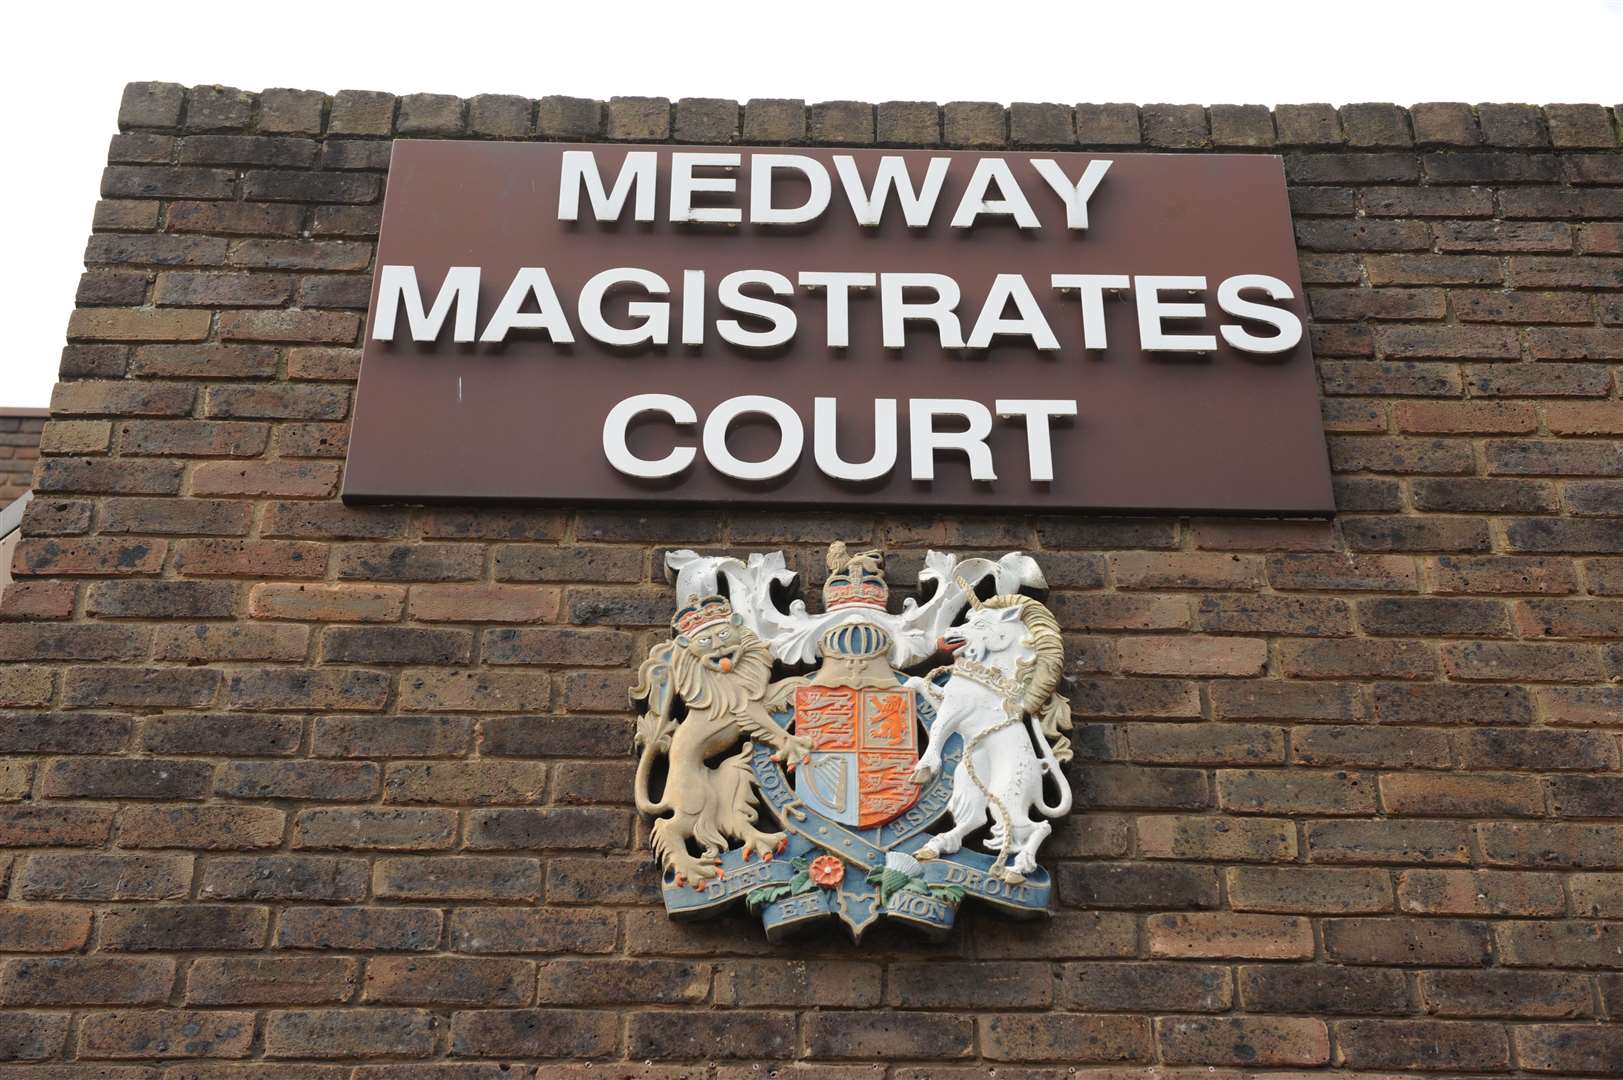 The 16 year old appeared at Medway Magistrates Court, Rope Walk, Chatham.